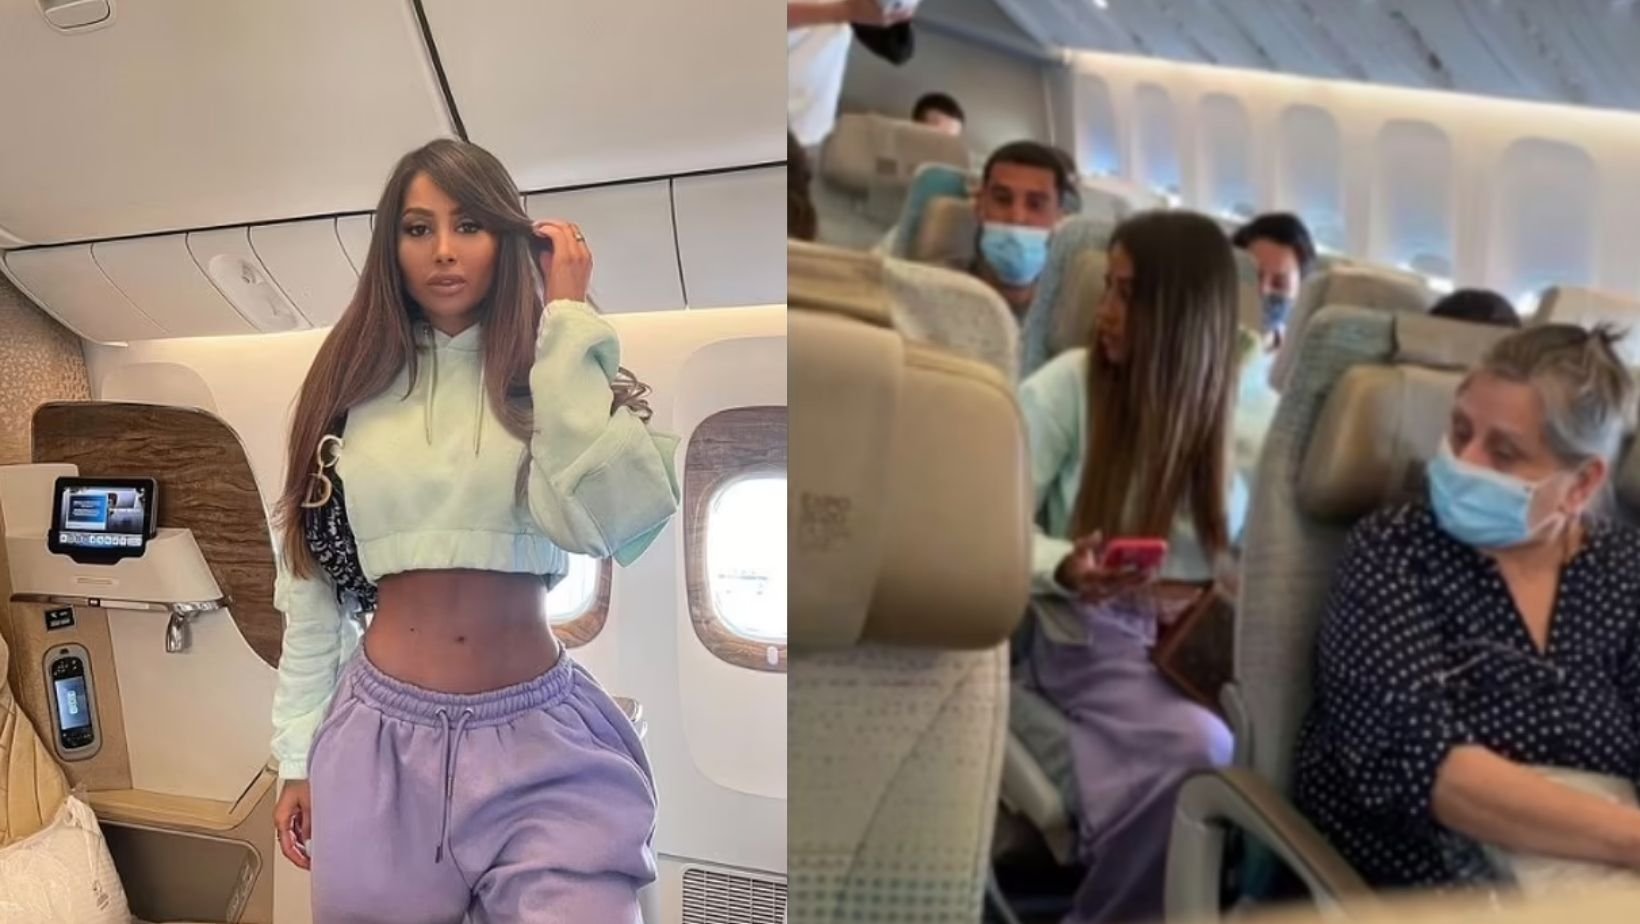 1 23.jpg?resize=412,232 - Influencer Is Caught Faking Her Business Class Flight After A Fan Spotted Her Sitting In Economy